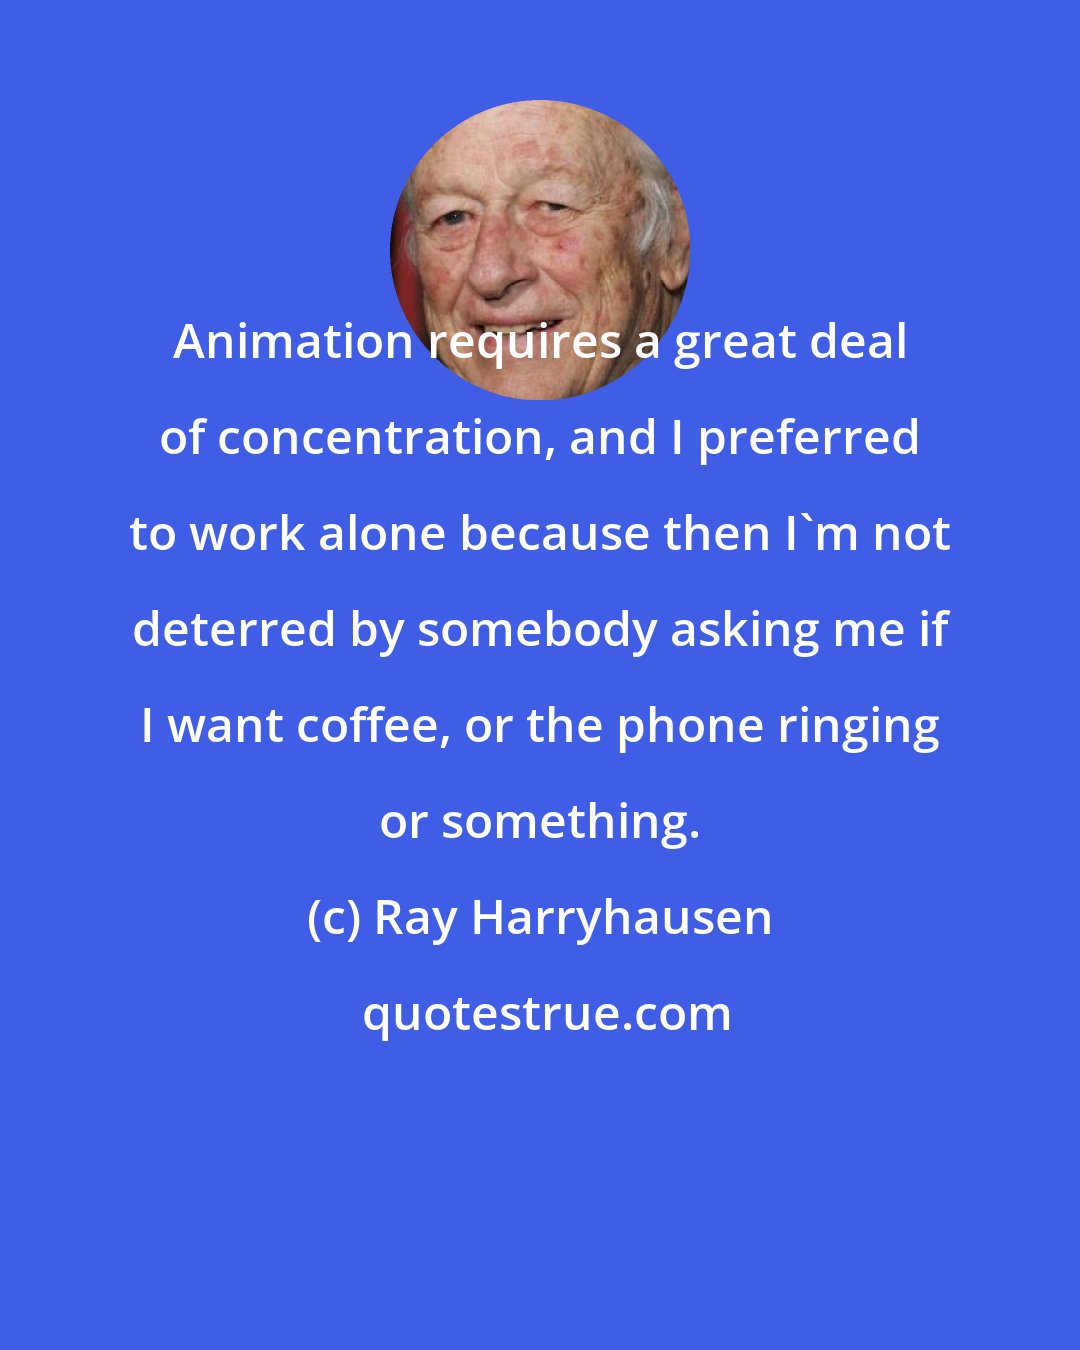 Ray Harryhausen: Animation requires a great deal of concentration, and I preferred to work alone because then I'm not deterred by somebody asking me if I want coffee, or the phone ringing or something.